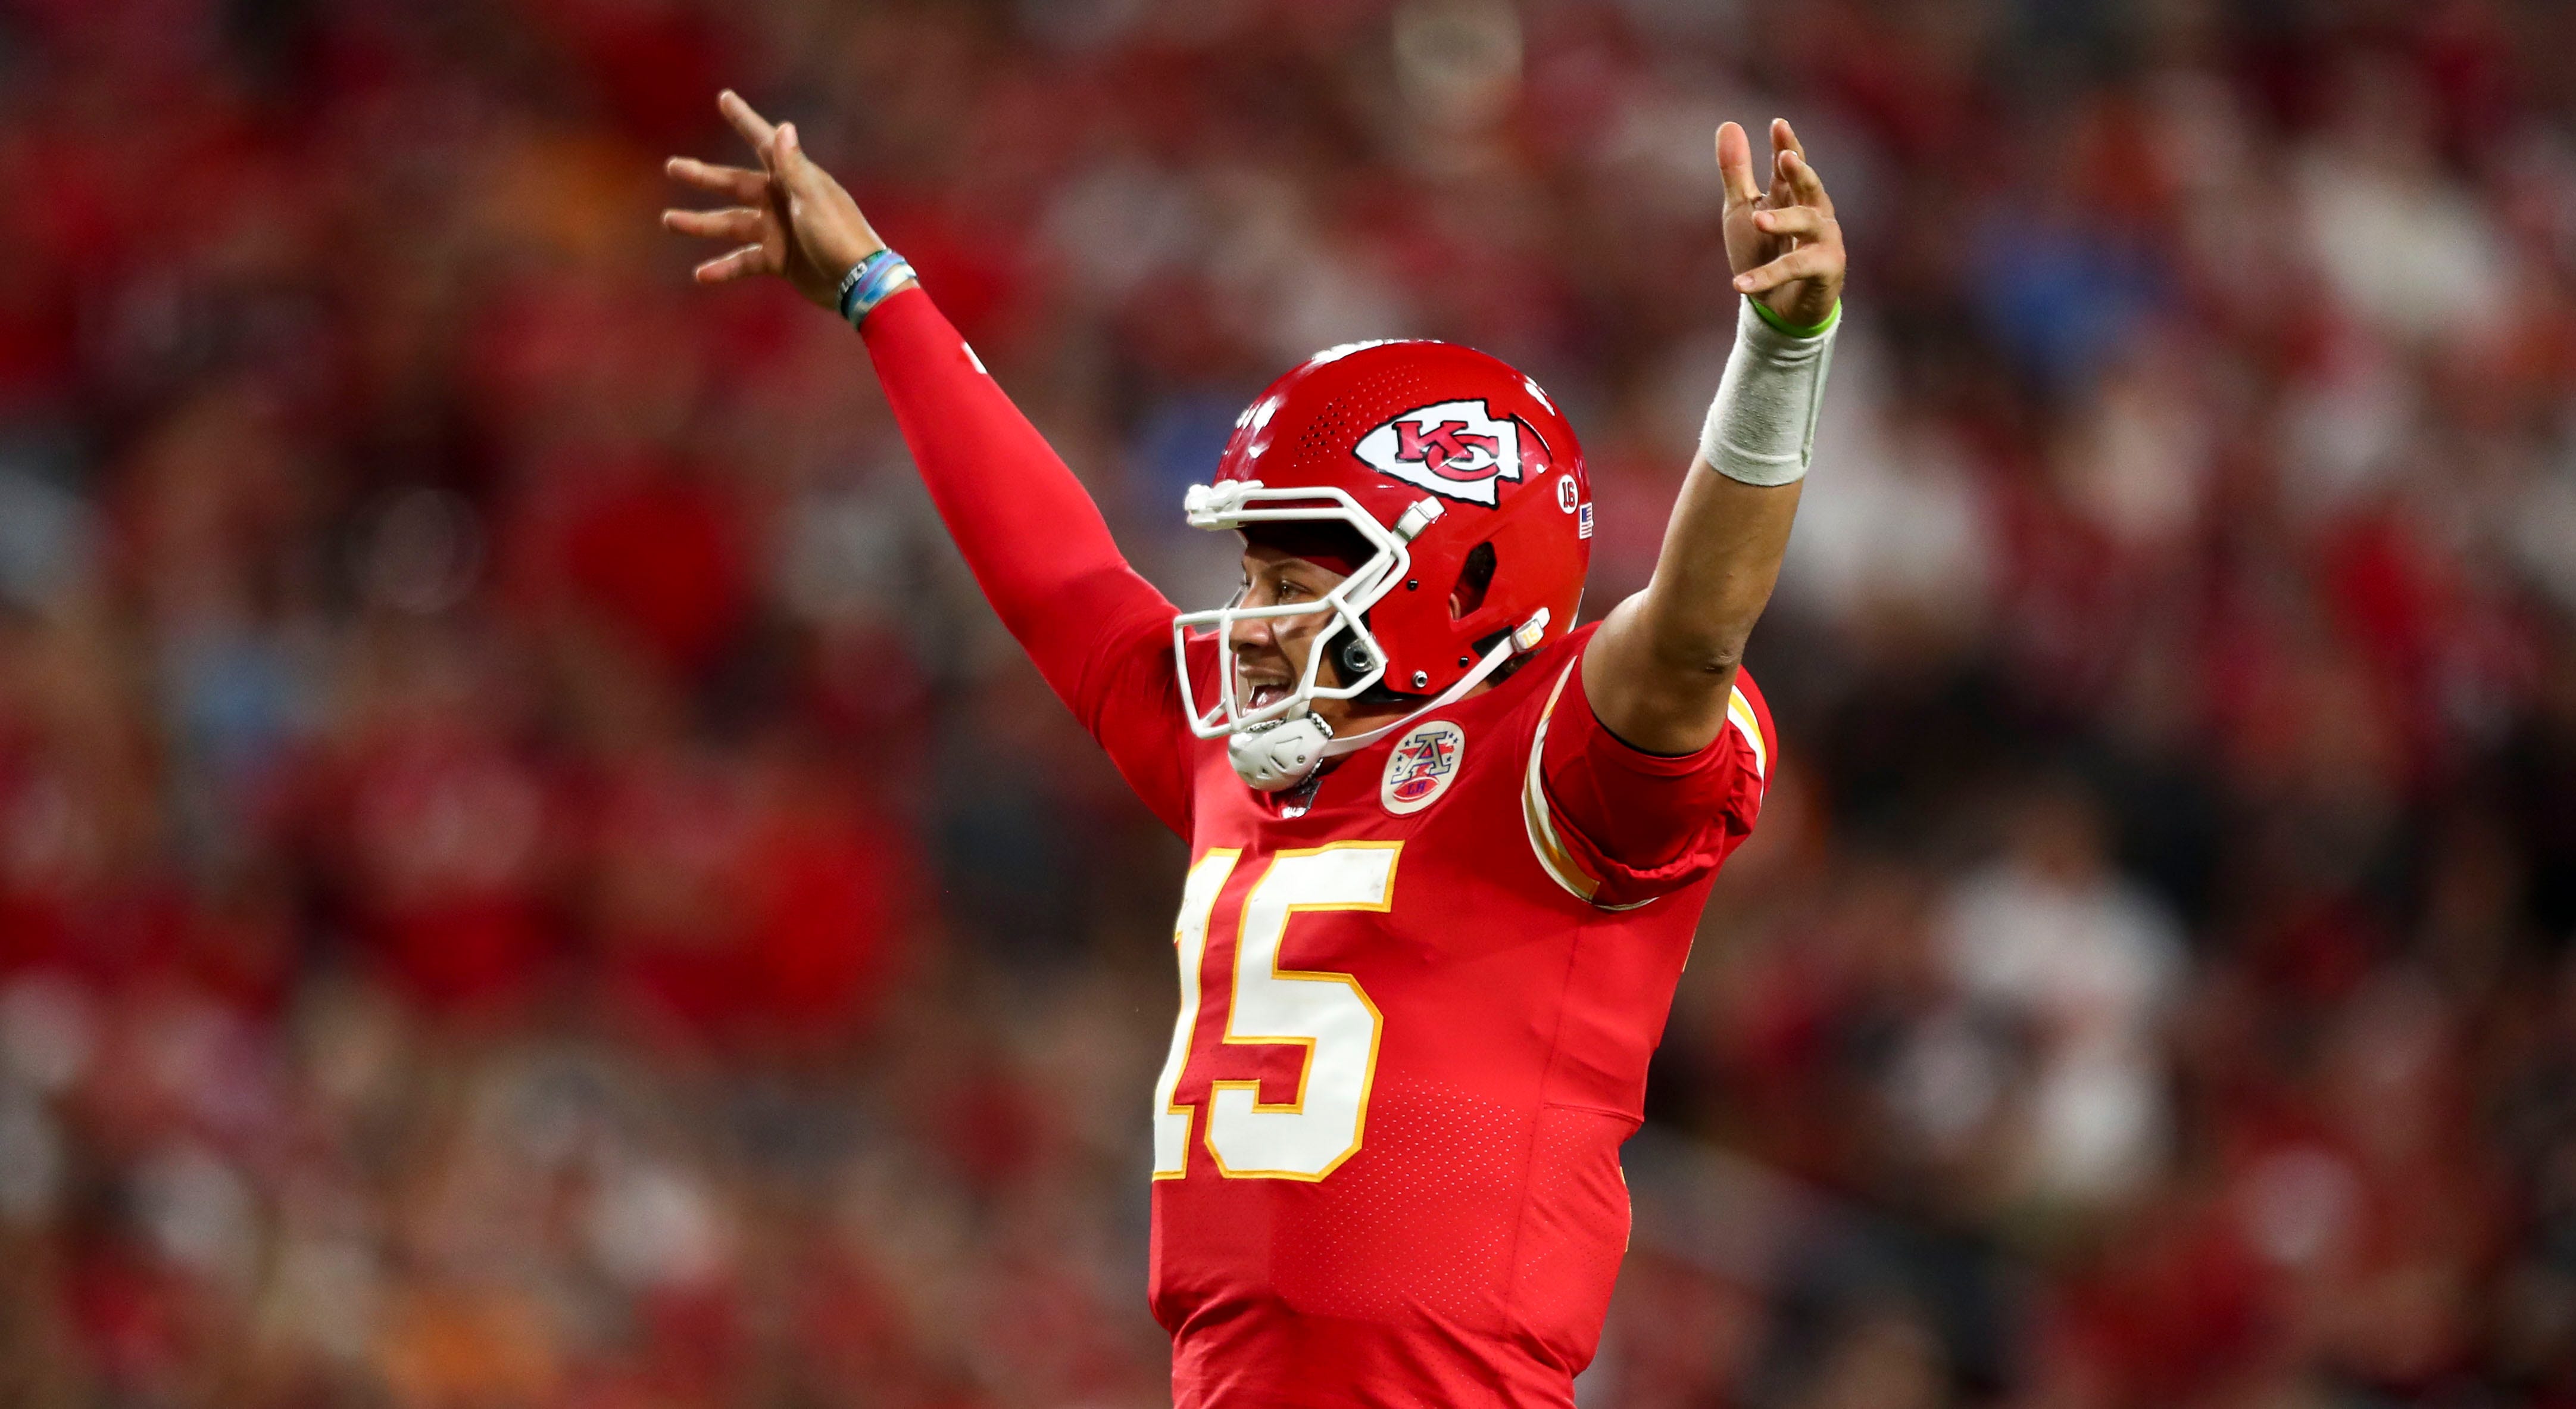 The Chiefs beat the Bucs behind Patrick Mahomes’ dazzling performance